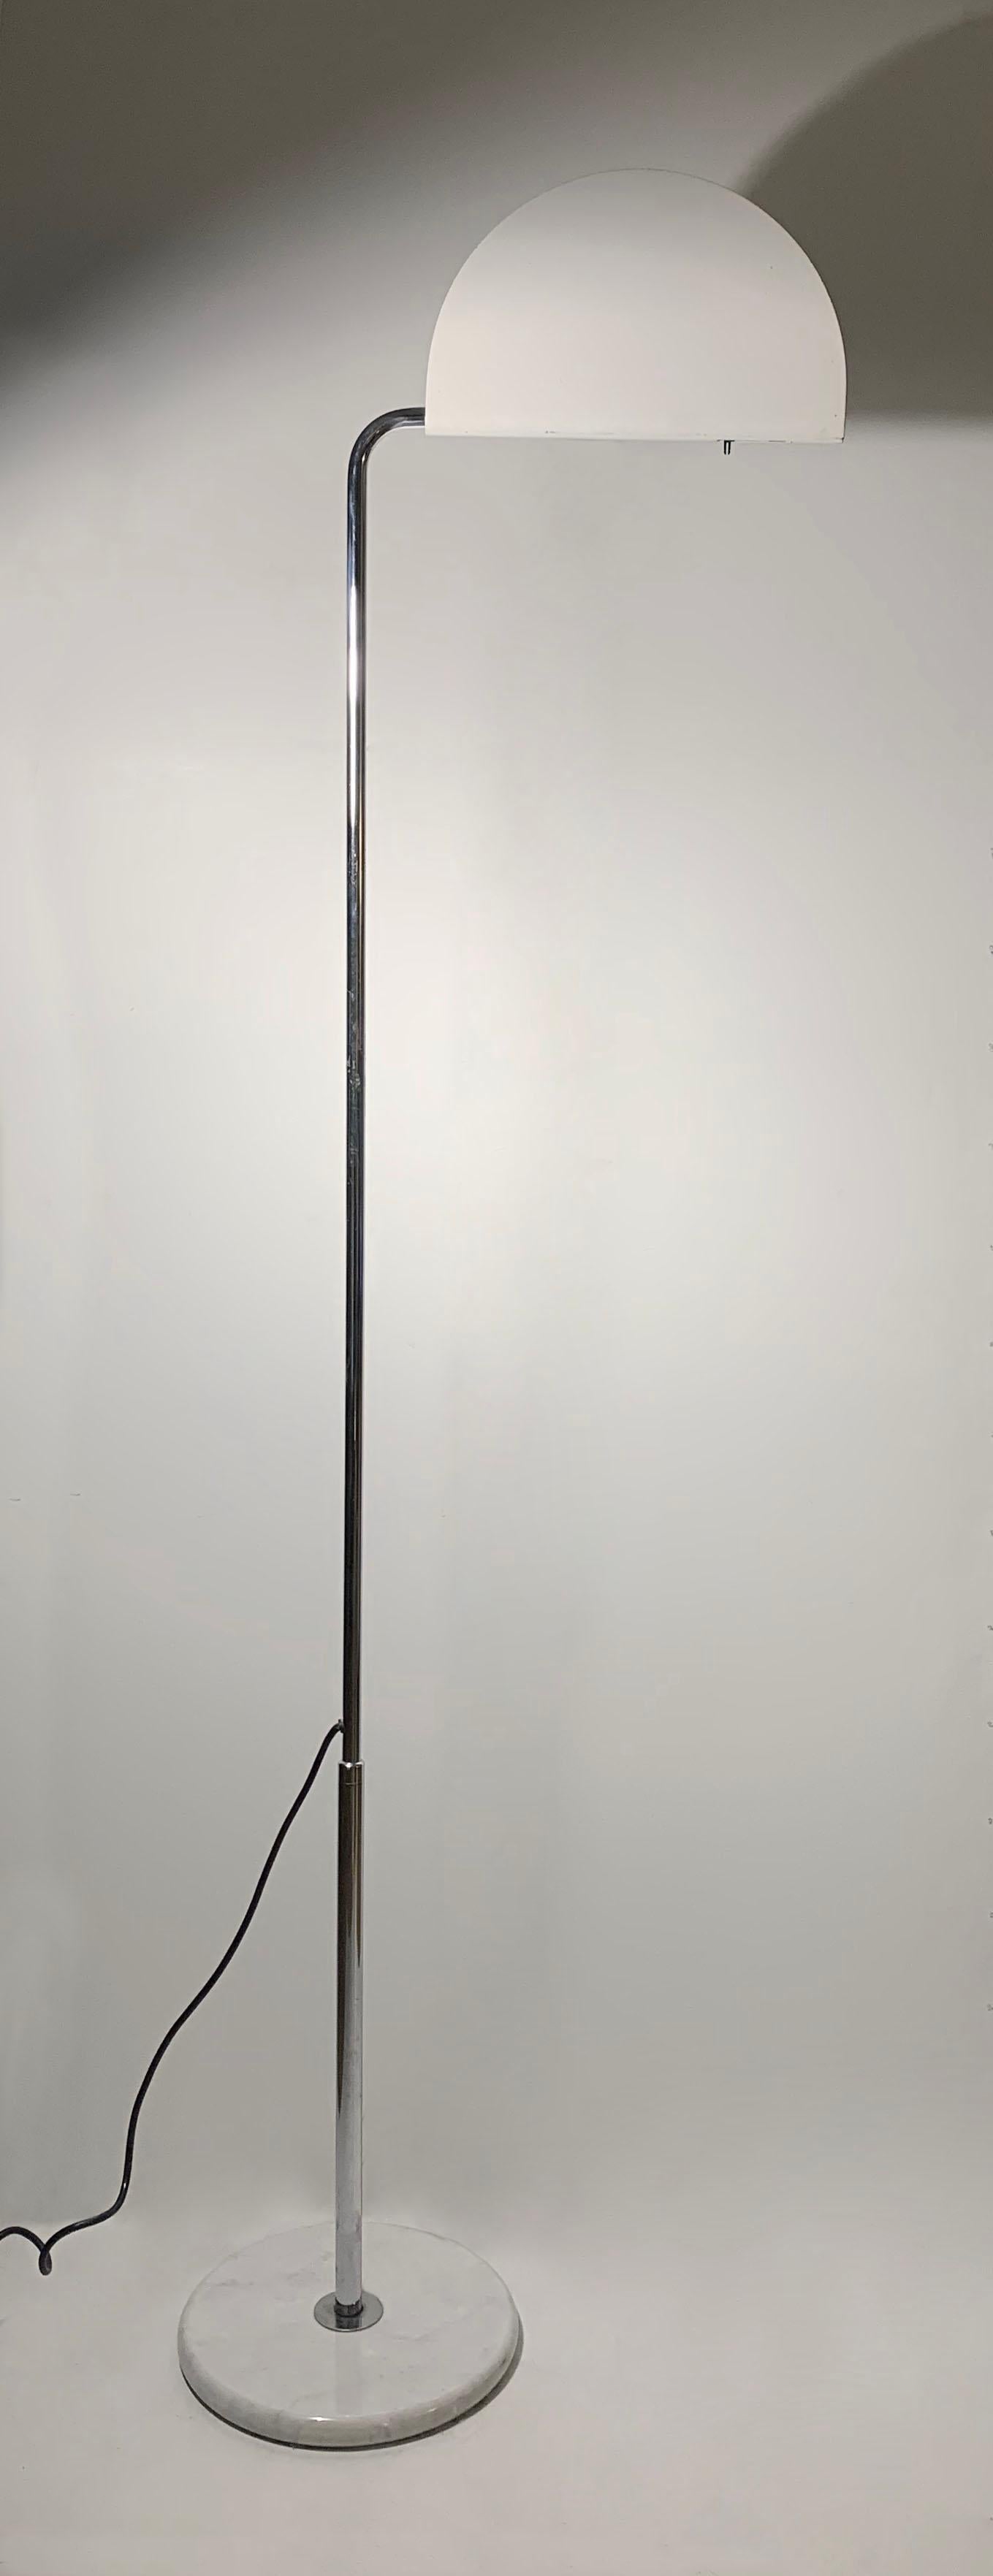 Modern white vintage floor lamp model Mezzaluna designed by Bruno Gecchelin Italy 1974 and produced by Skipper Pollux, Milano.
A gorgeous floor lamp with chrome-plated adjustable tubular steel shaft from 180 cm (70.87 in) to 197 cm (77.56 in)